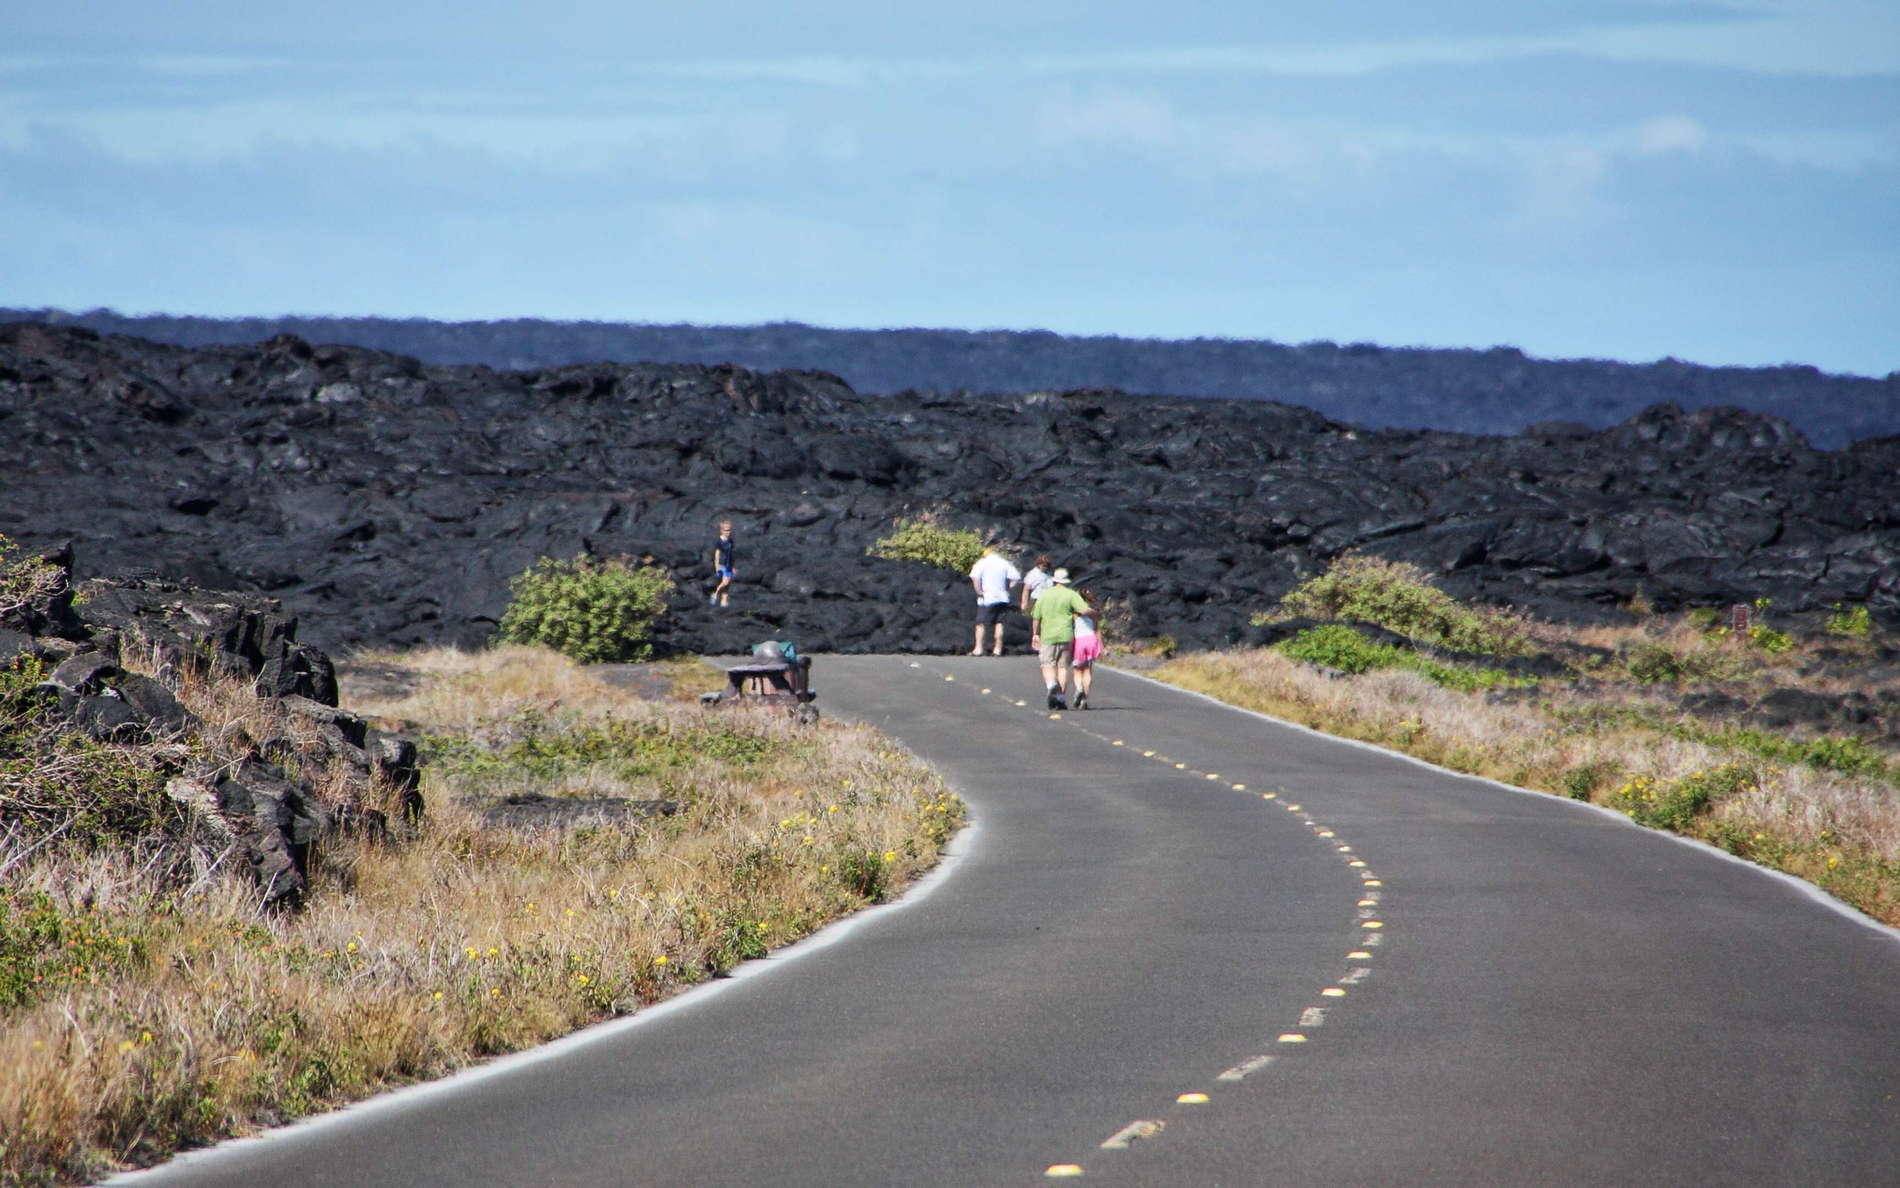 Hawai'i Volcanoes NP  |  Chain of Craters Road